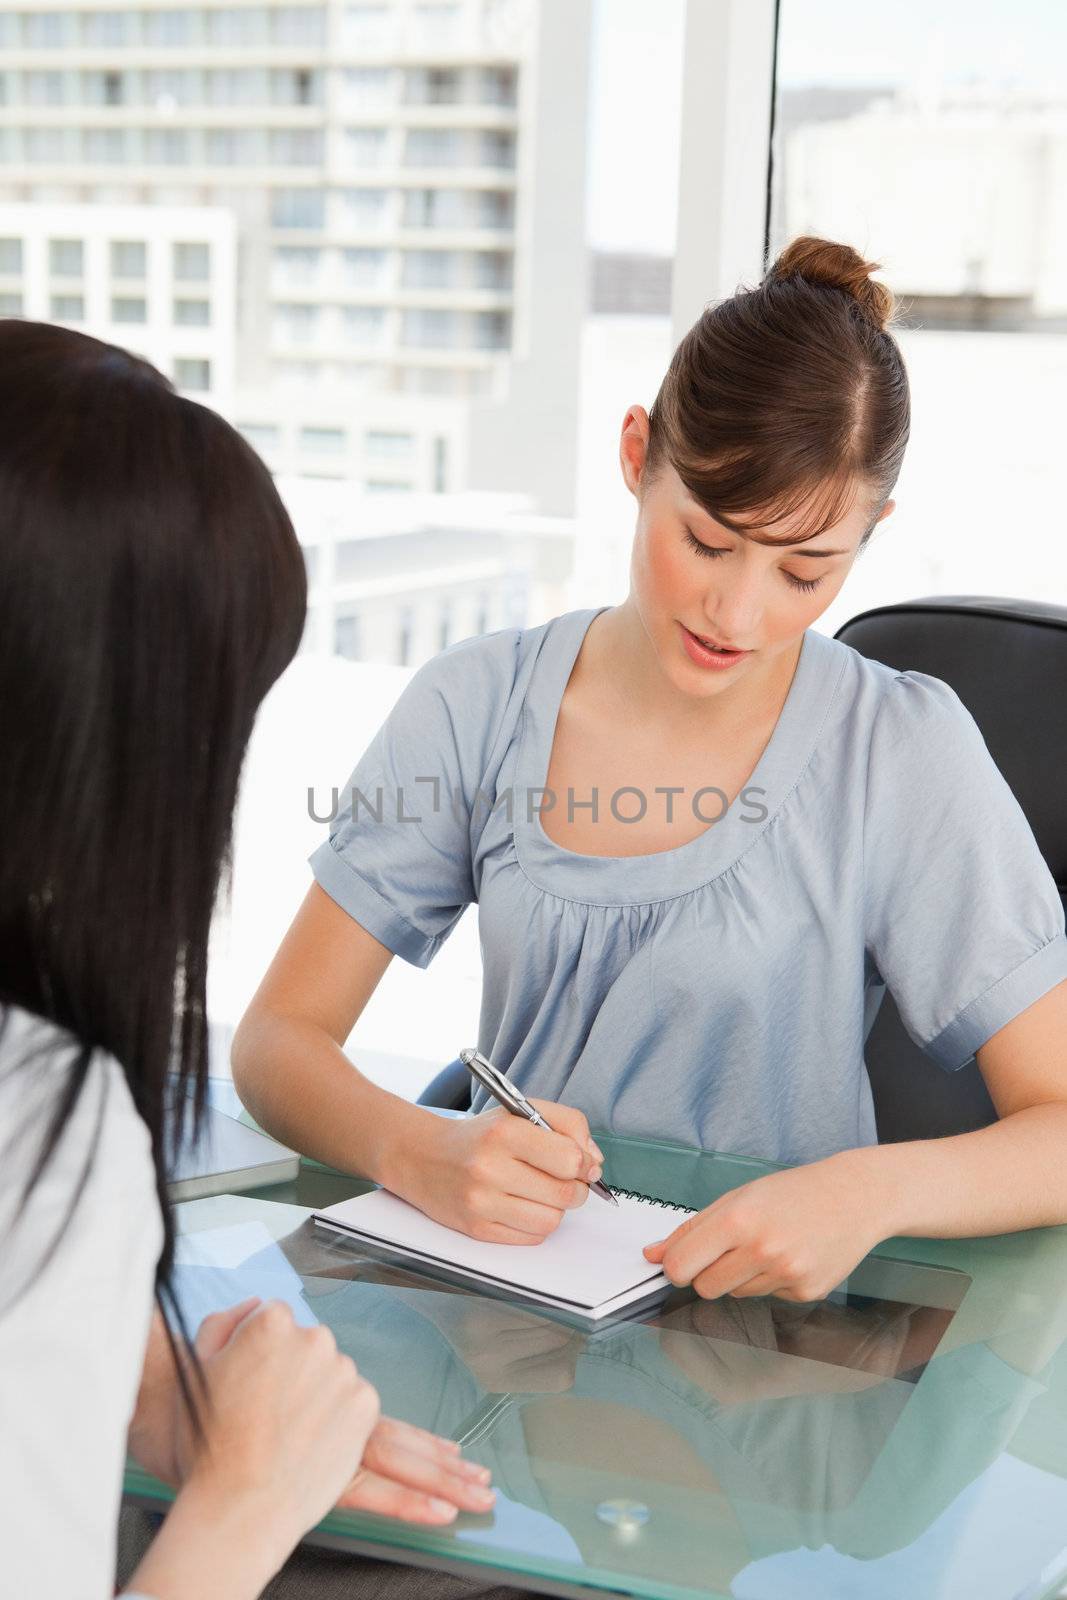 As her co-worker chats the brunette employee writes on her note  by Wavebreakmedia